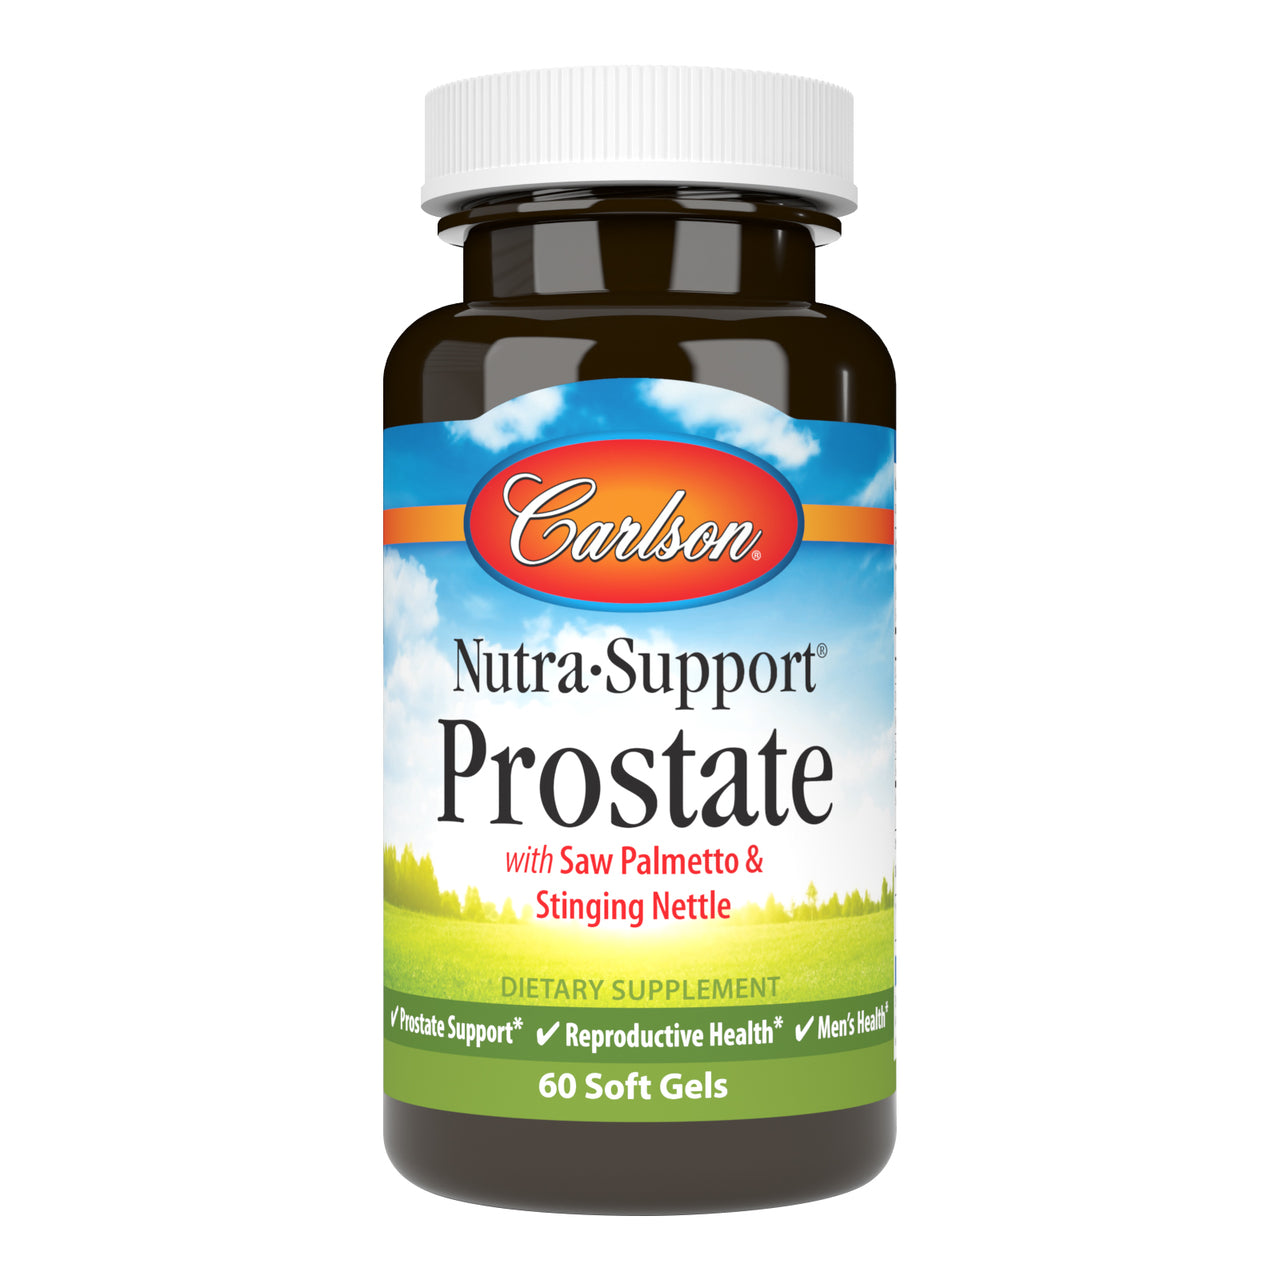 Carlson Nutra-Support Prostate with Saw Palmetto & Stinging Nettle 60 Soft Gels Prostate Support, Reproductive Health & Men's Health